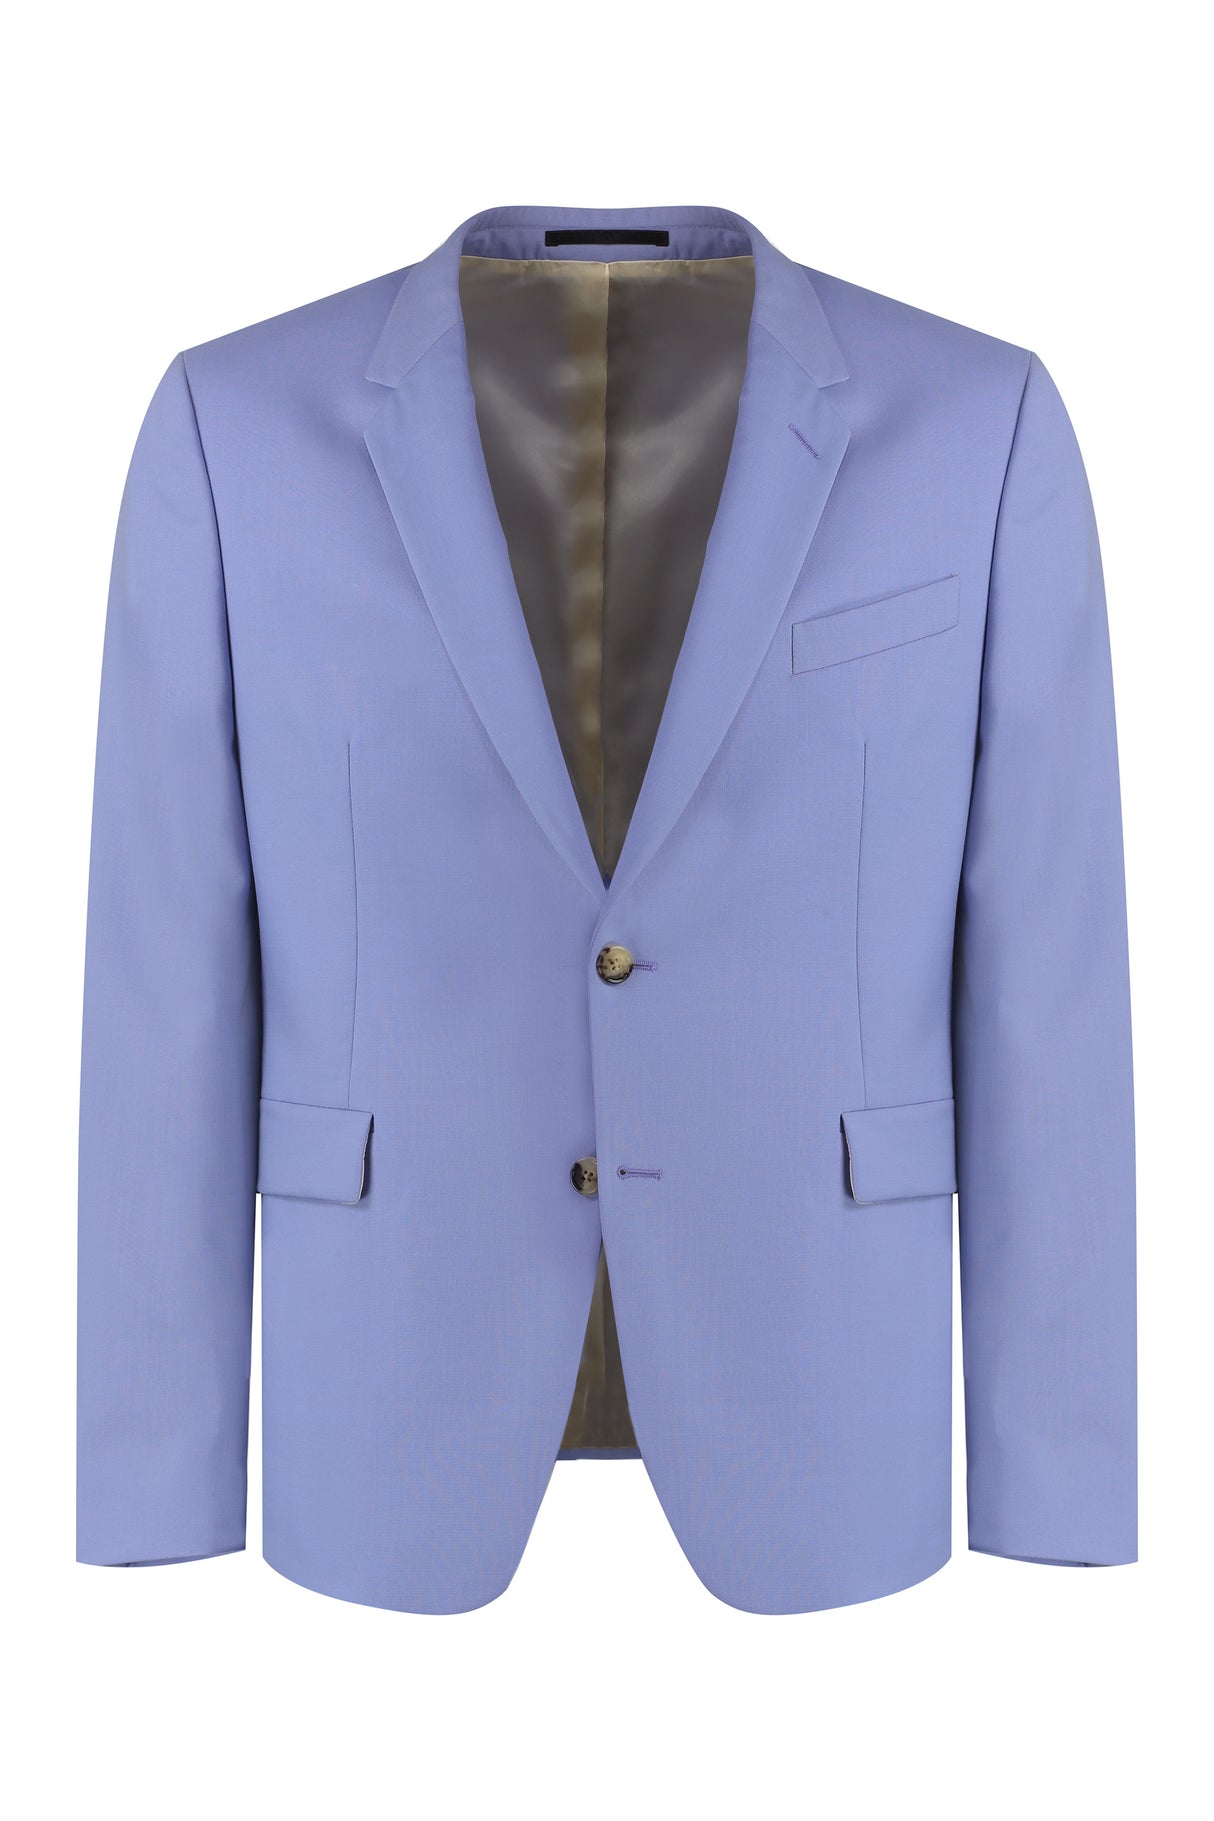 PAUL SMITH Lilac Wool and Mohair Two Piece Suit for Men - SS23 Collection